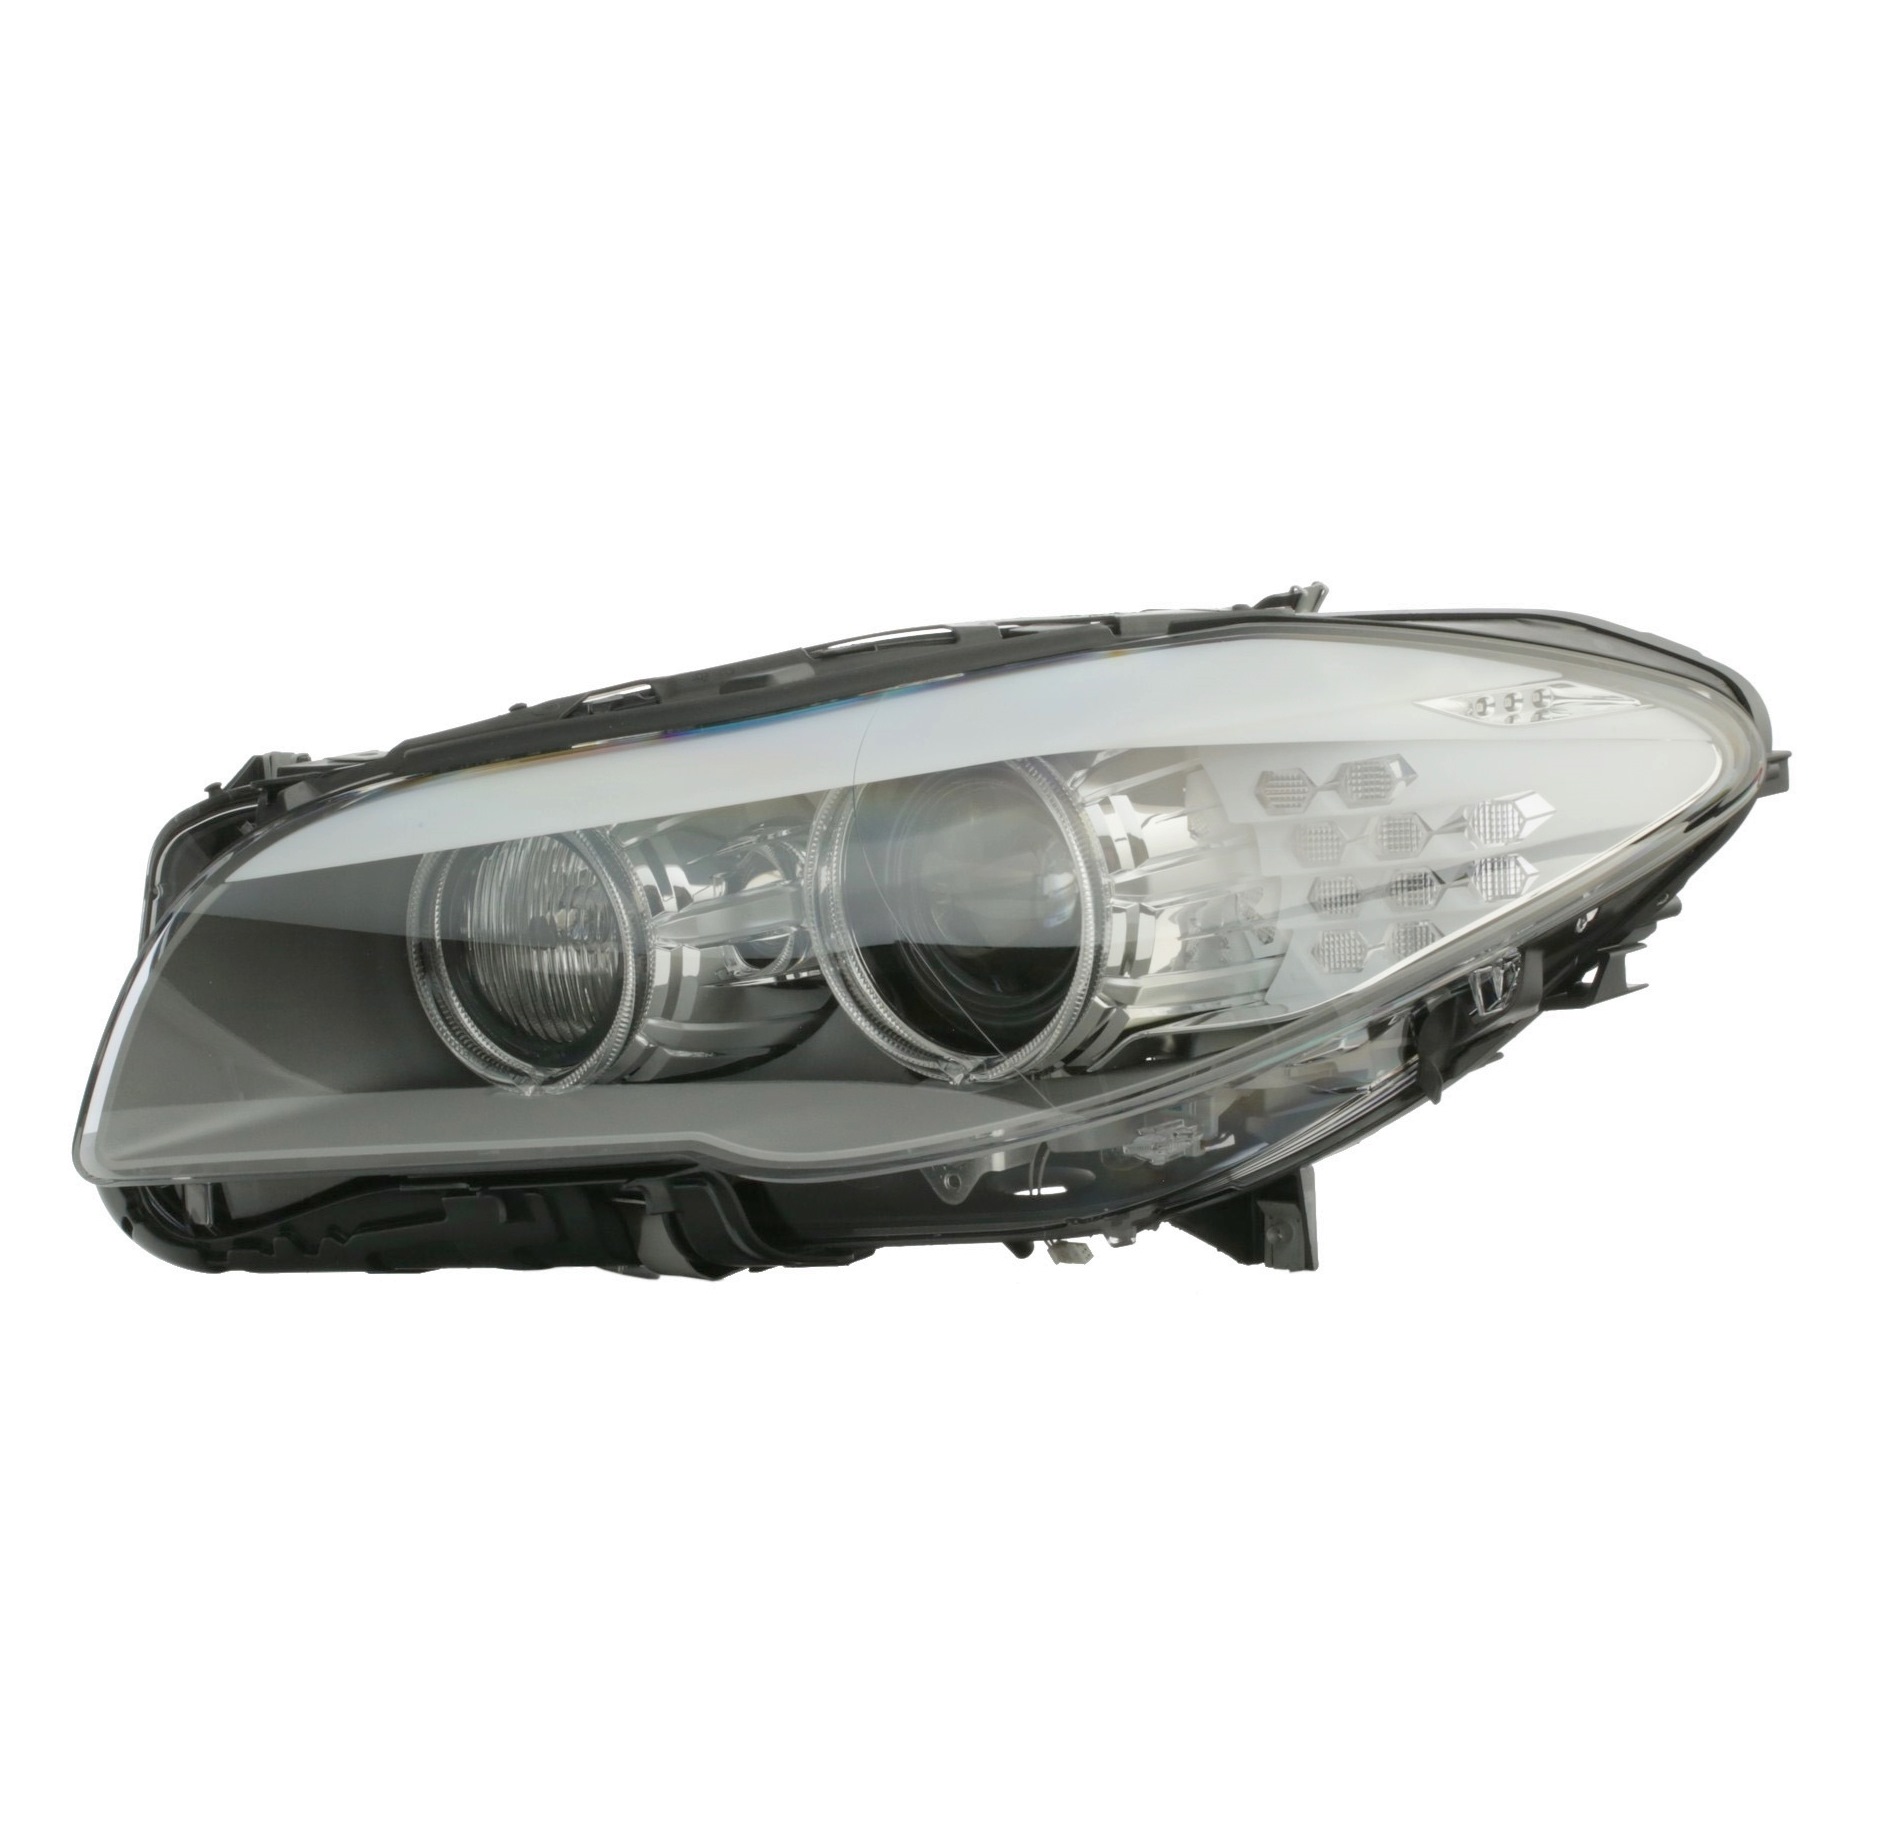 HELLA 1ZS 010 131-631 Headlights Left, D1S, D1S/H7, H7, LED, with motor for headlamp levelling, without ballast, without glow discharge lamp, Bi-Xenon, LED, with bulb, without control unit for dynamic bending light (AFS), without LED control unit for daytime running-/position ligh, without LED control unit for indicators